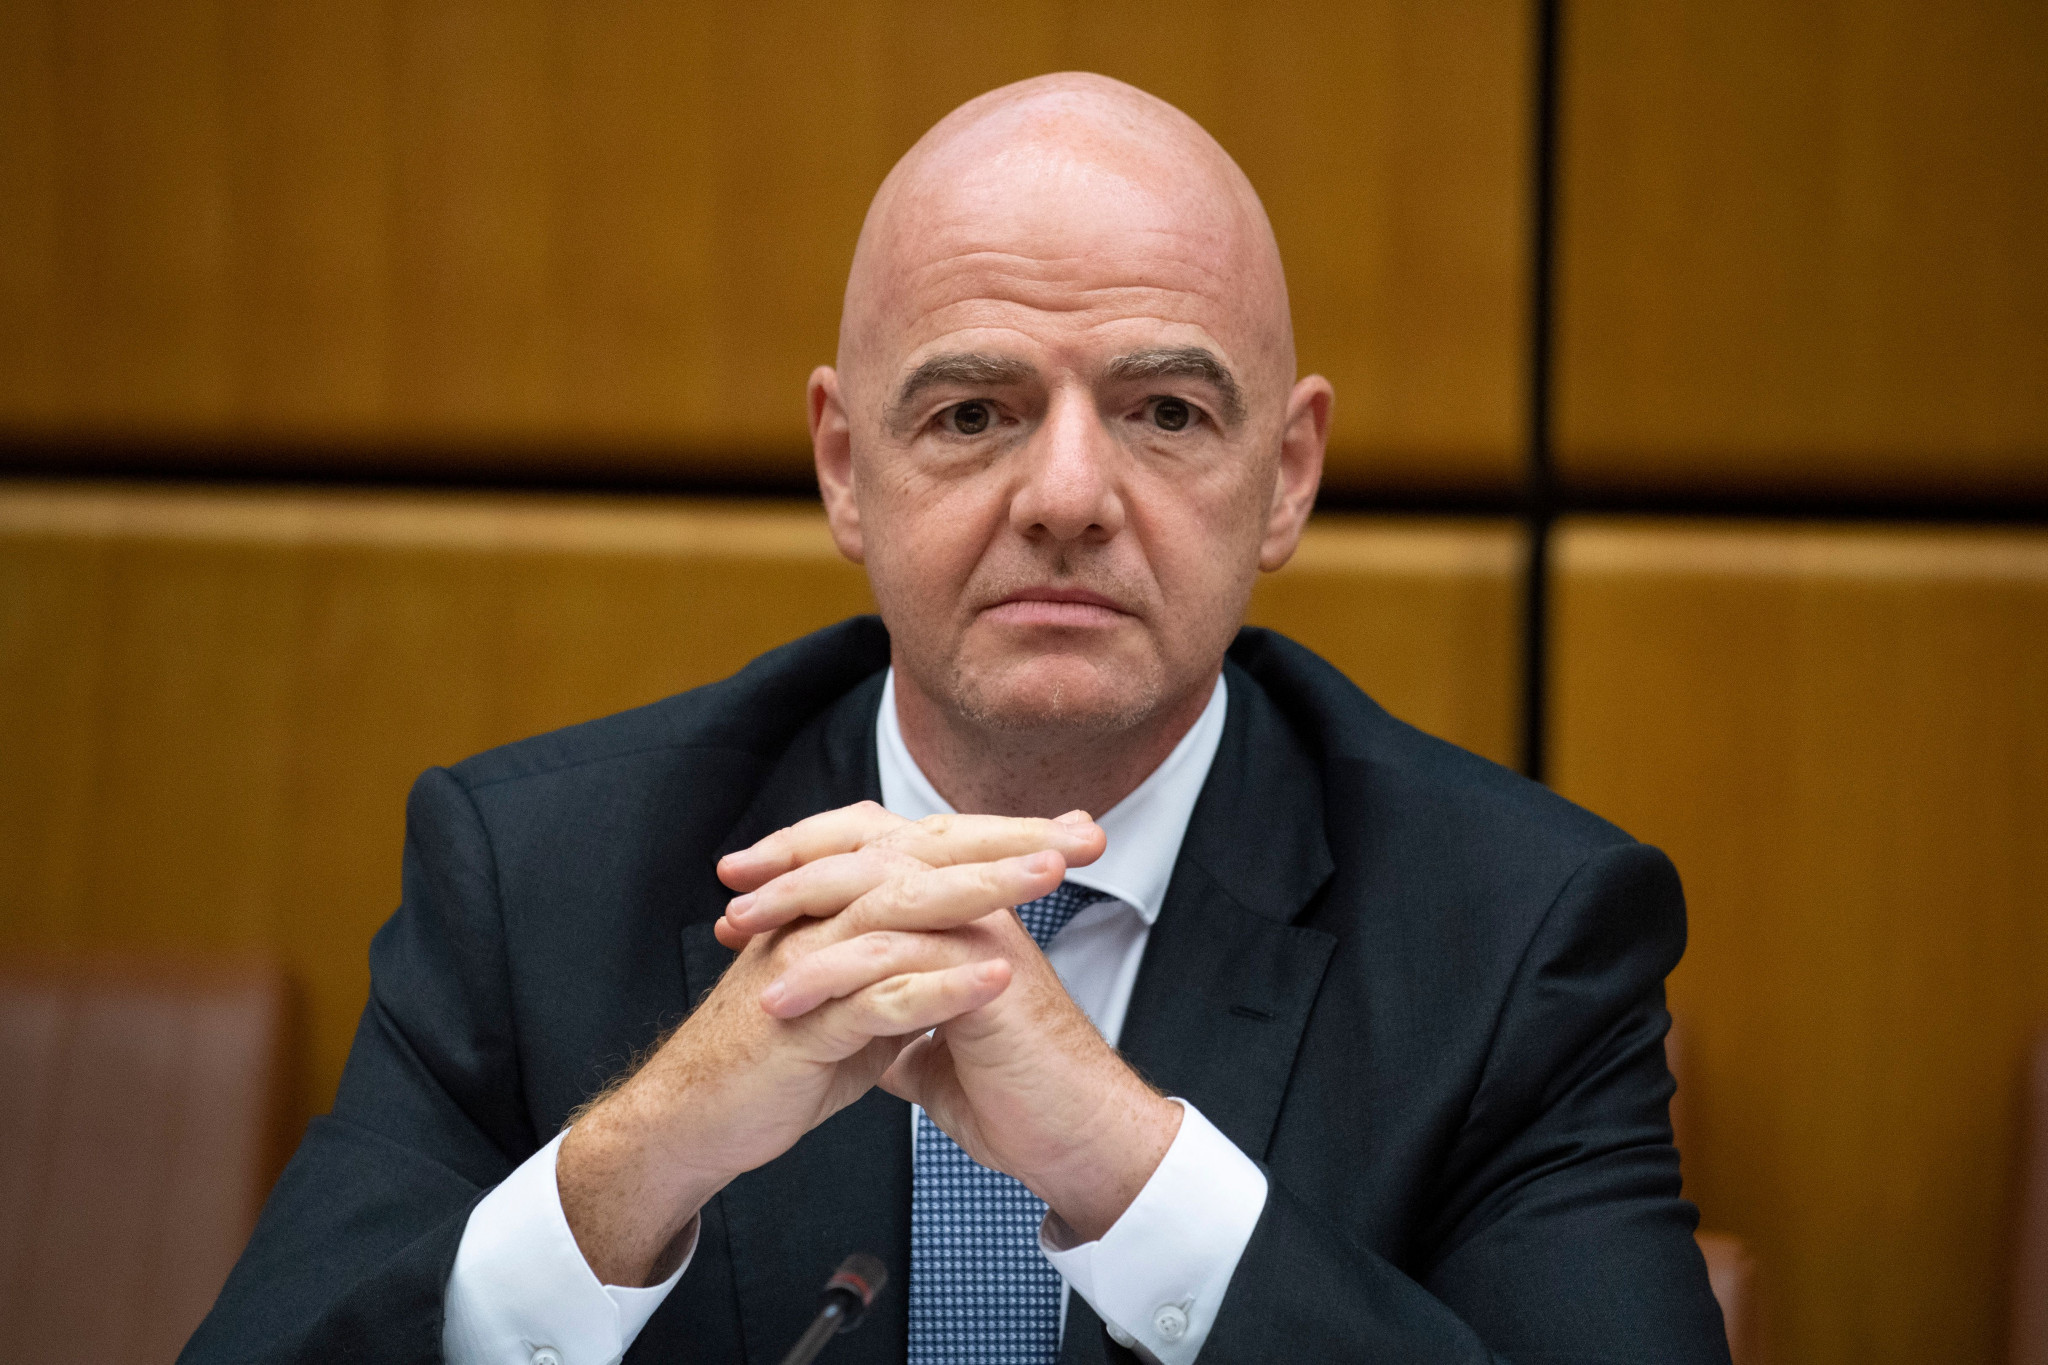 The IOC says it is aware of allegations against Gianni Infantino ©Getty Images